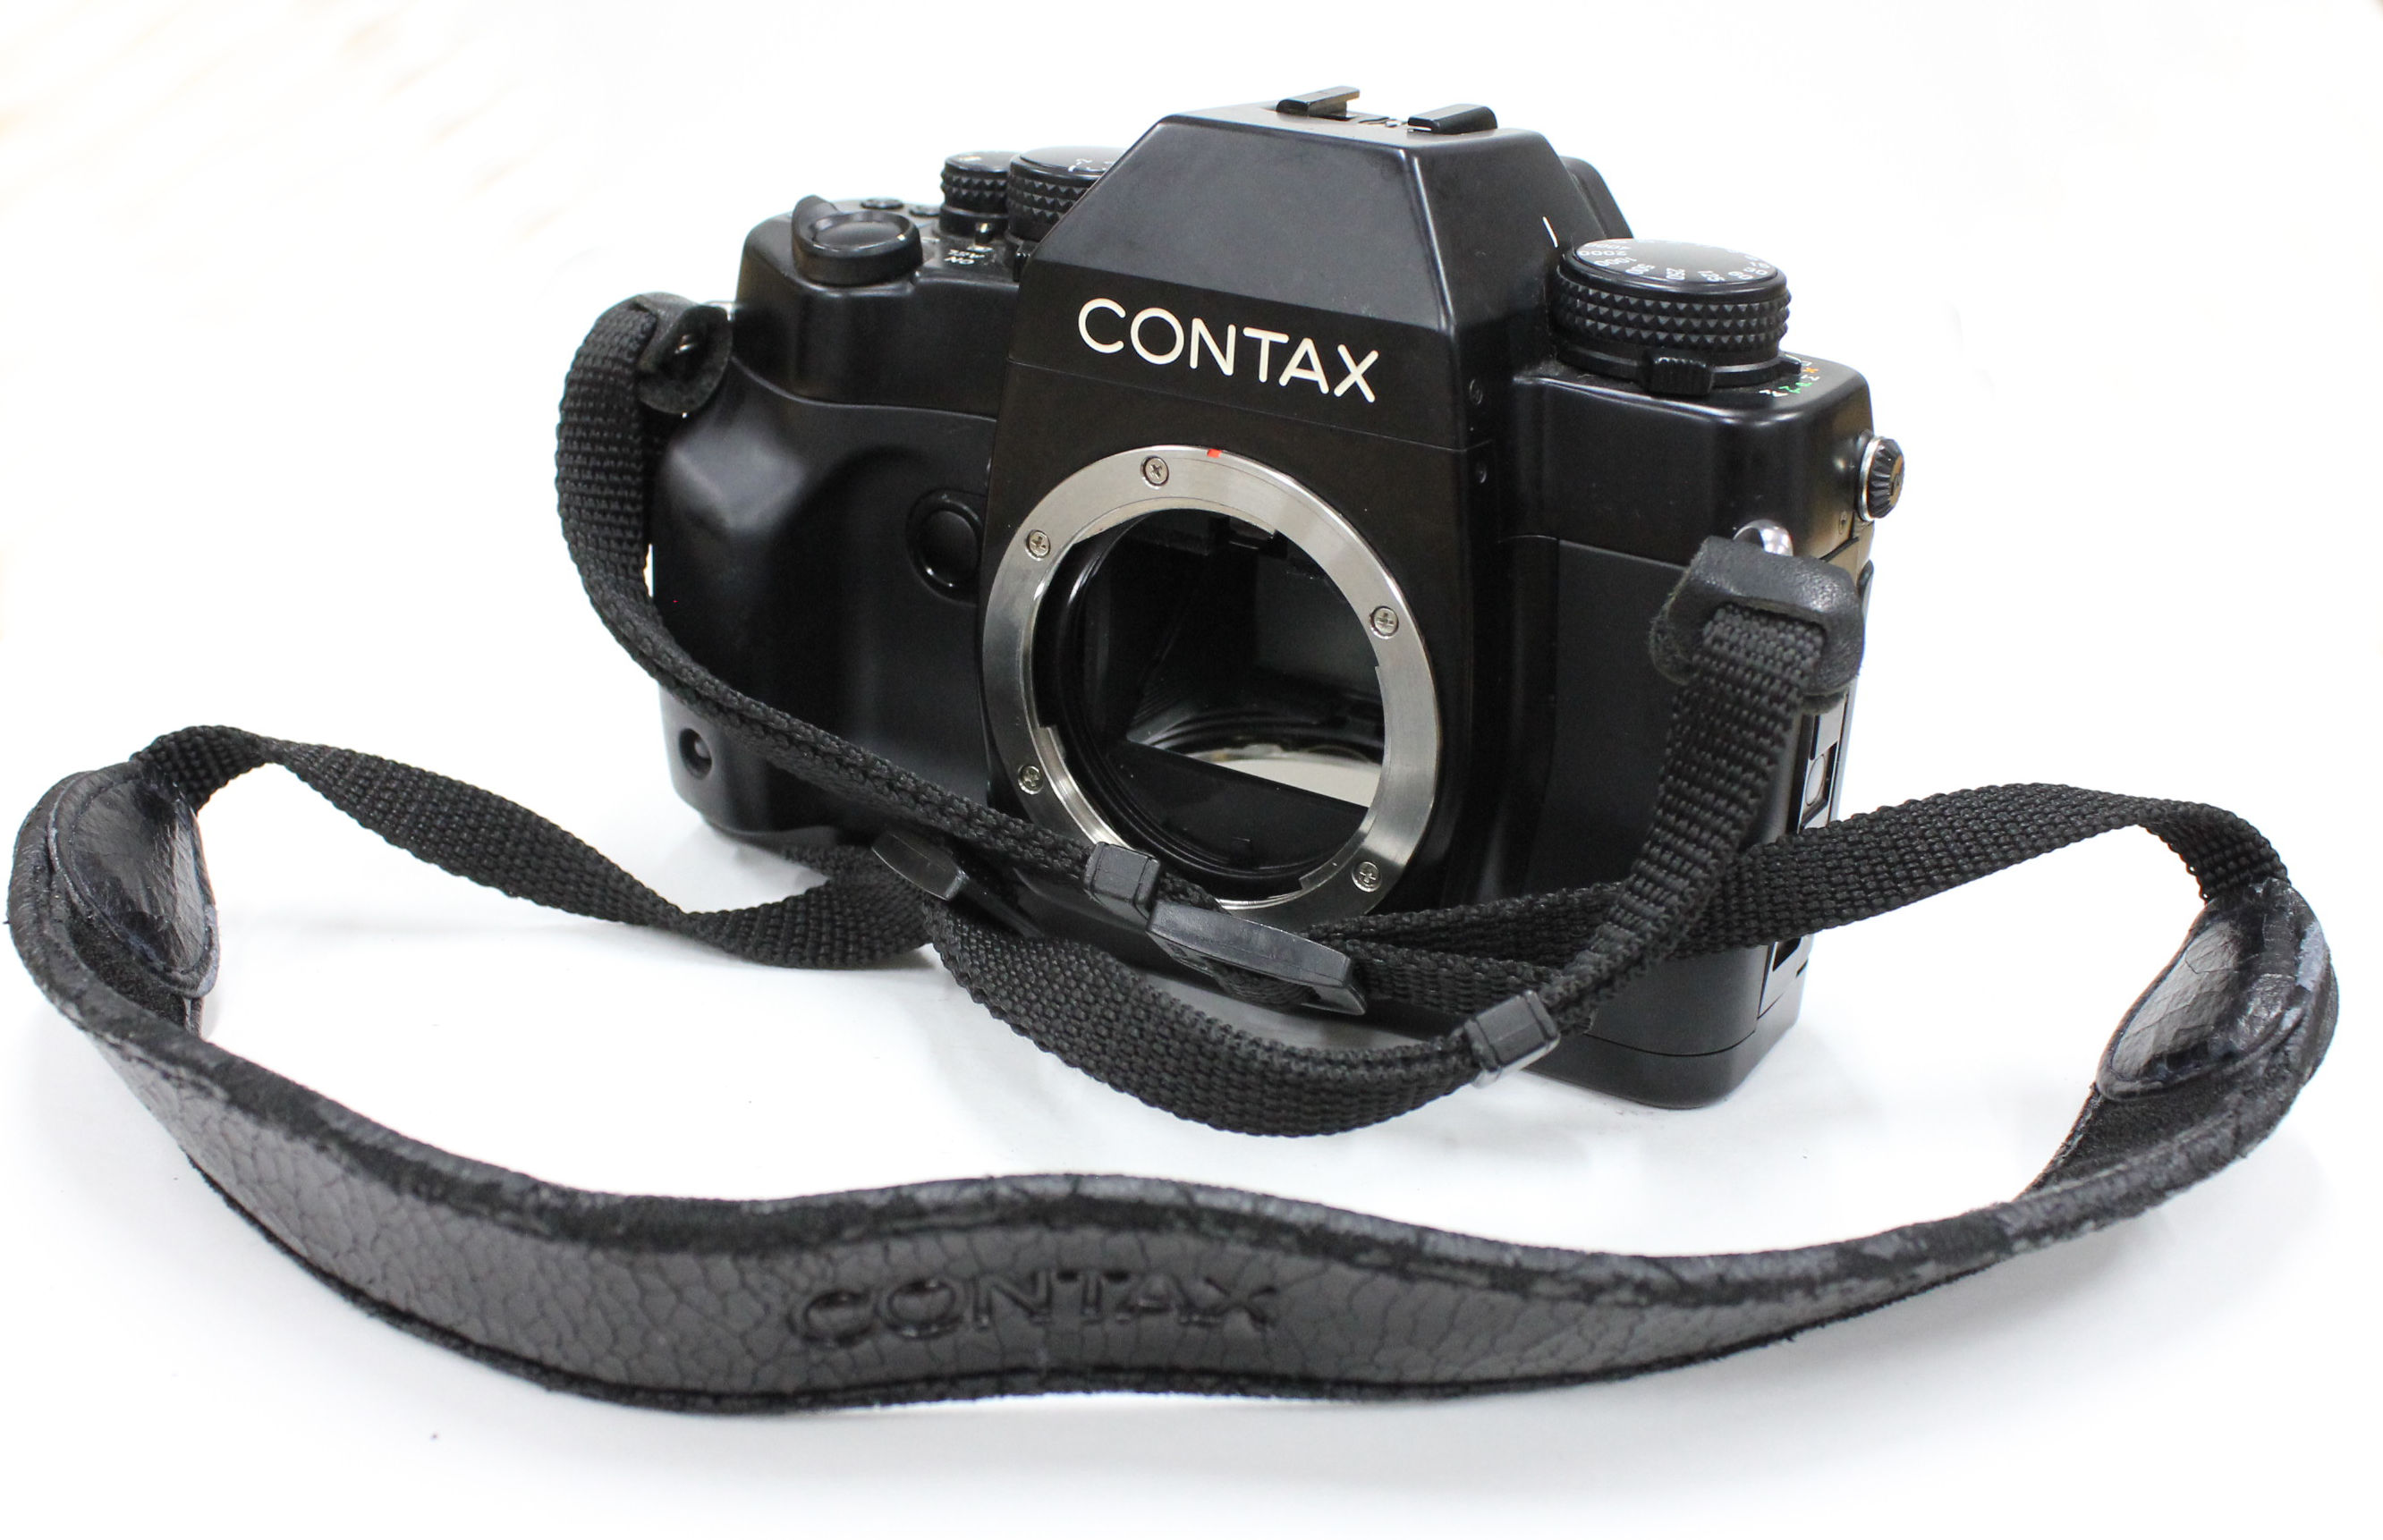  Contax RX 35mm SLR Film Camera Black Body from Japan Photo 1